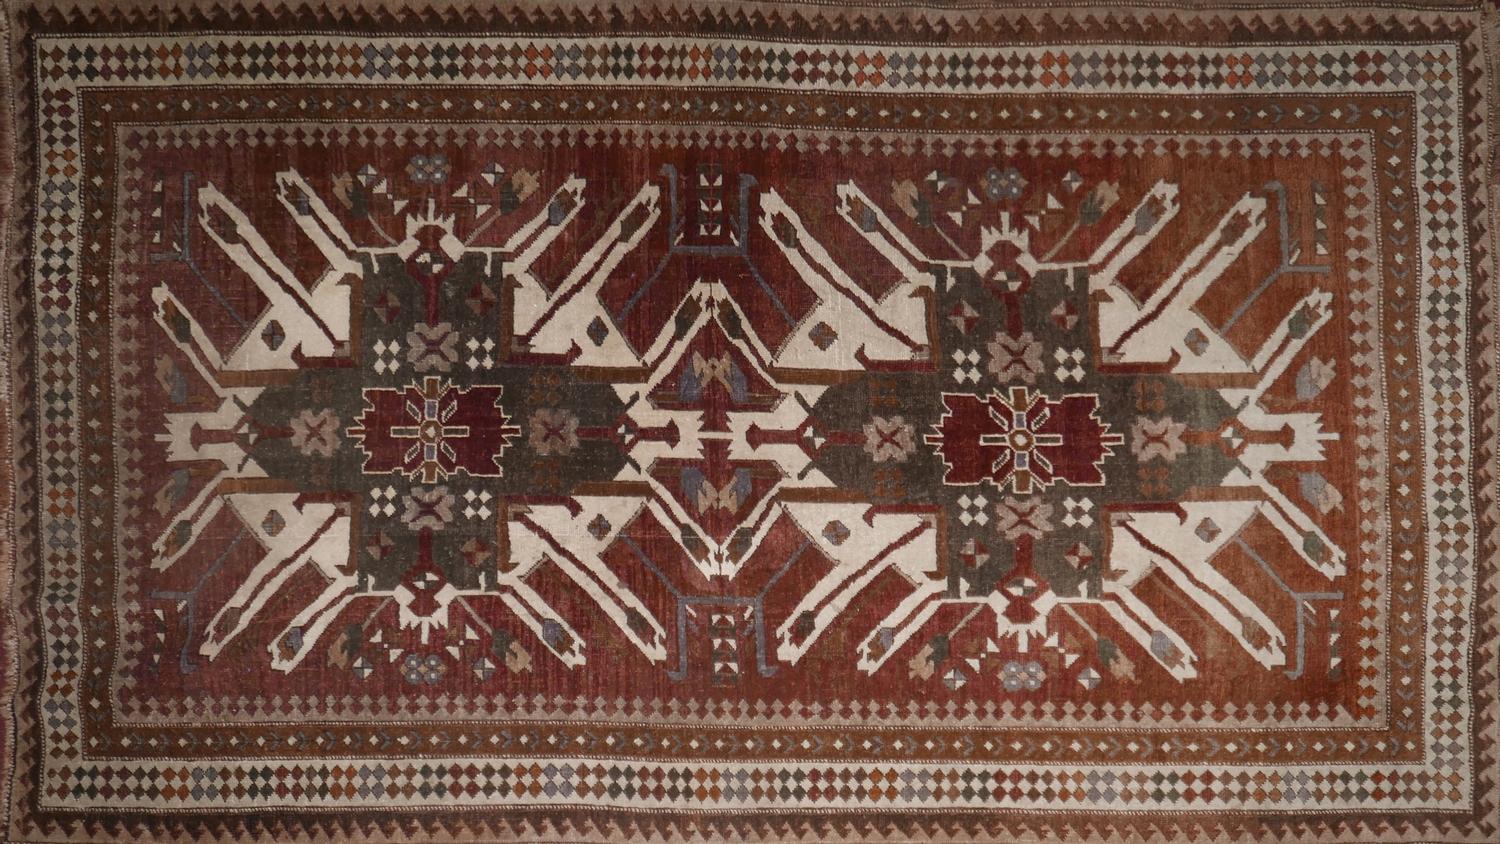 A 20th century north west Persian rug with two large geometric medallions, on a green and maroon